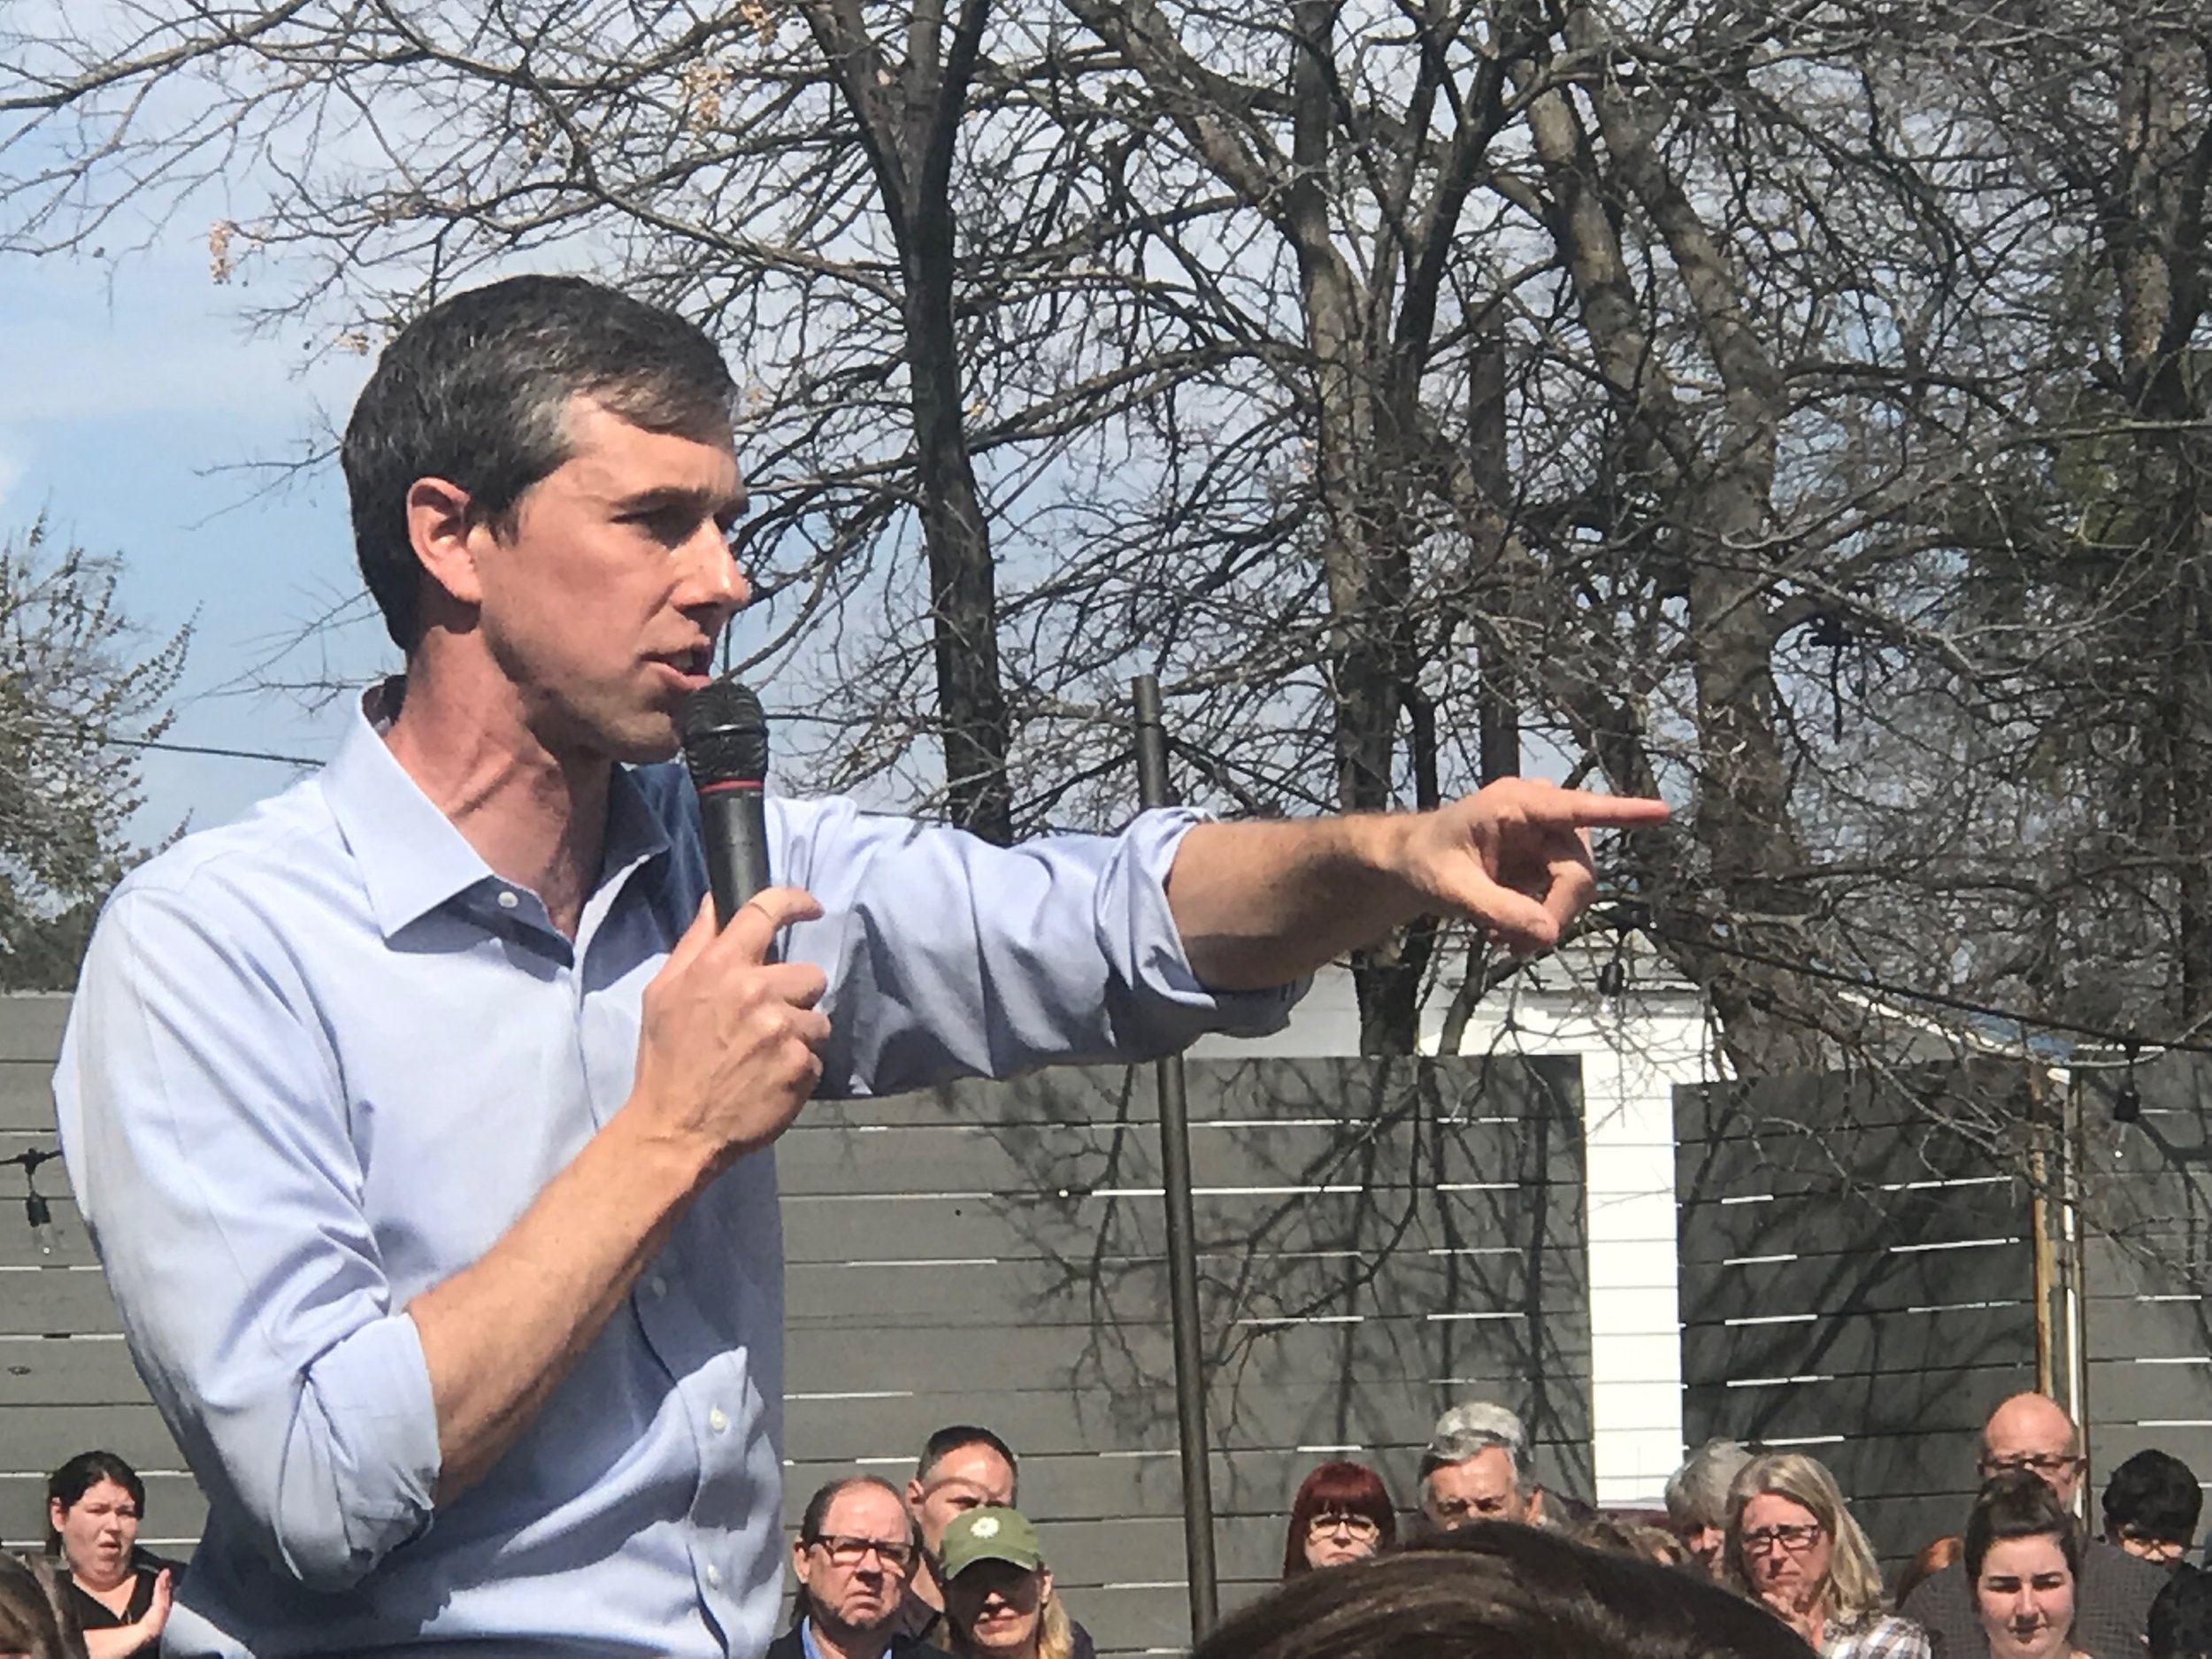  Beto O'Rourke, a Texas Democrat challenging GOP Sen. Ted Cruz, speaks at a town hall event in Georgetown, Texas. Photo by Rick Holmes 